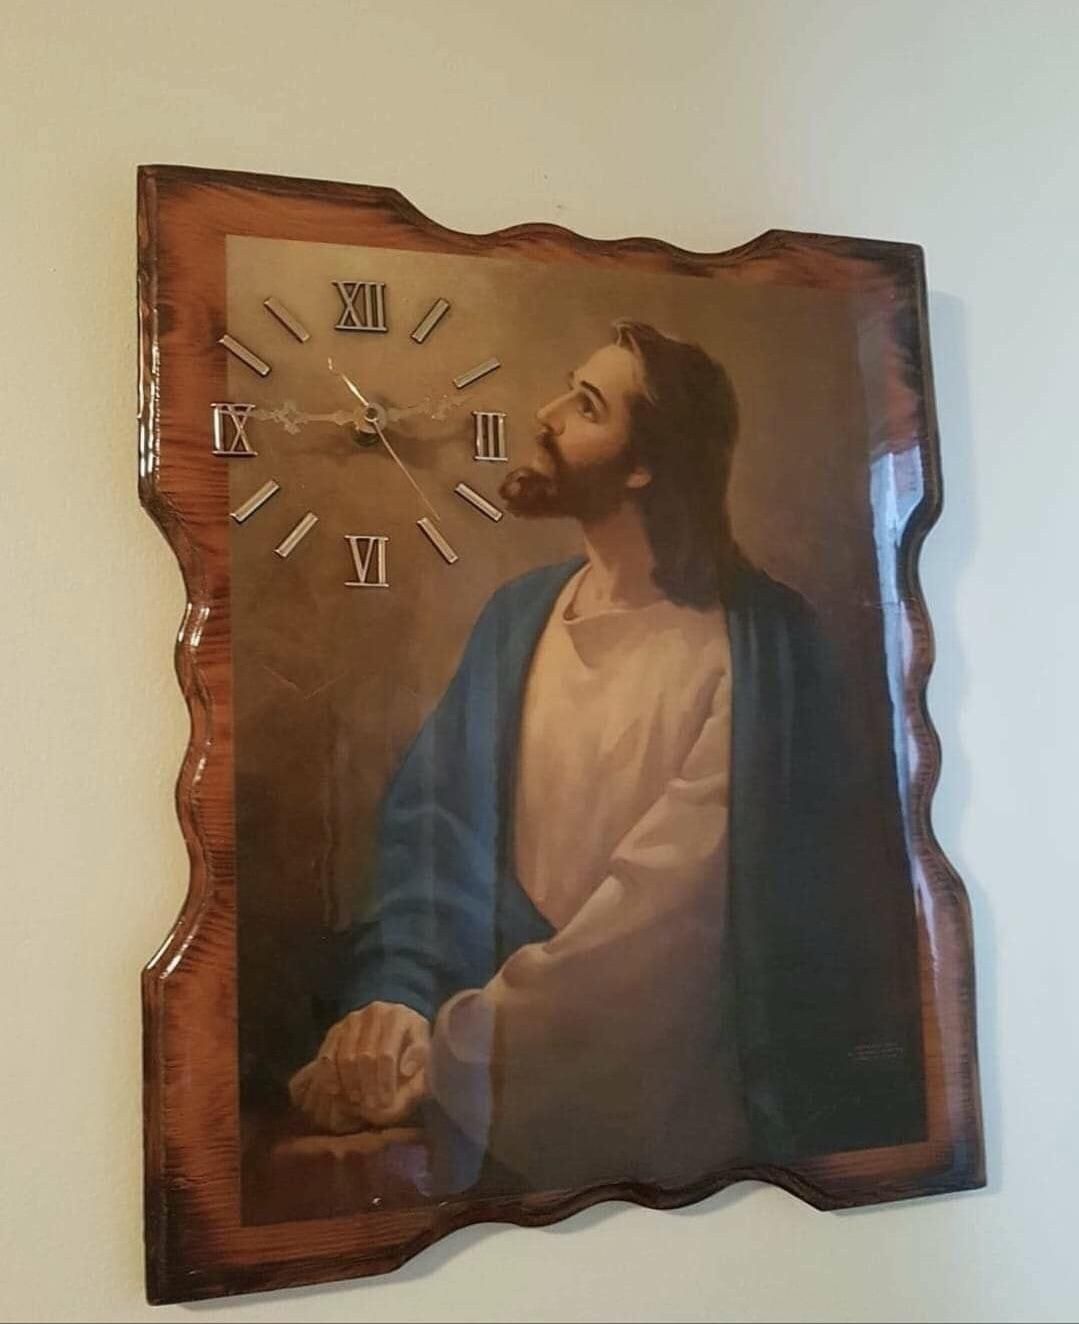 Jesus would you look at the time